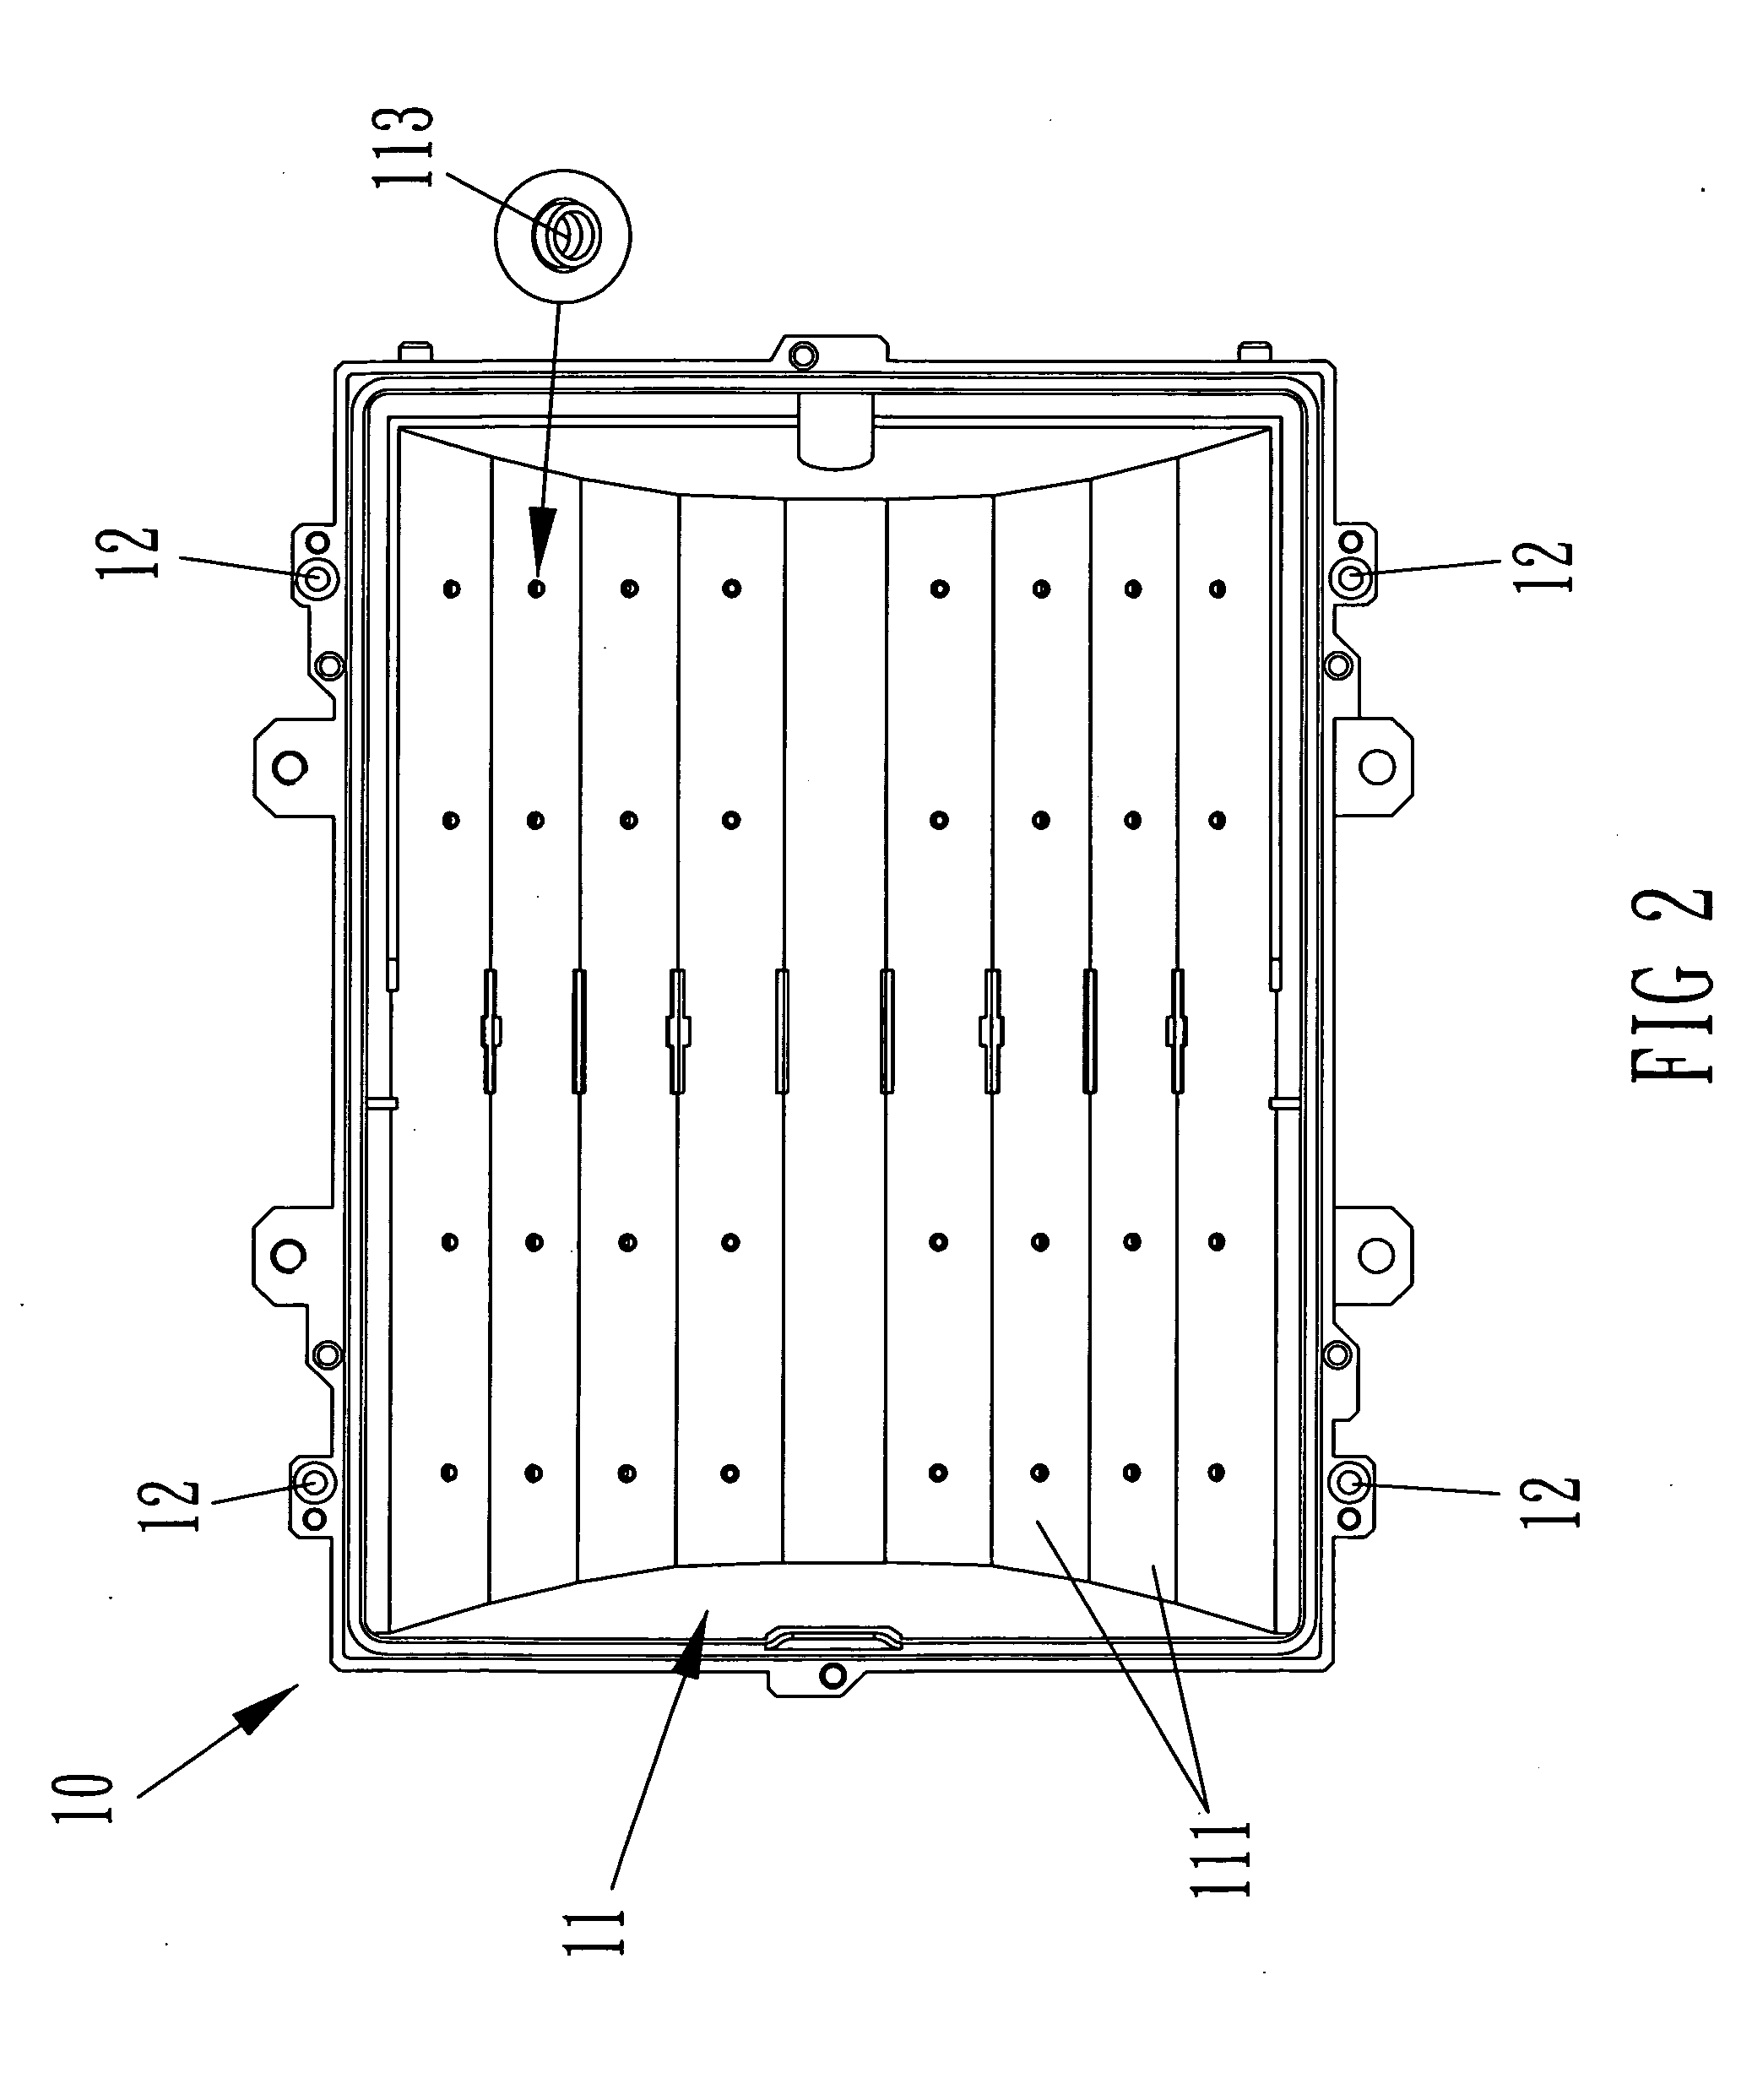 Light base structure of high-power LED street lamp